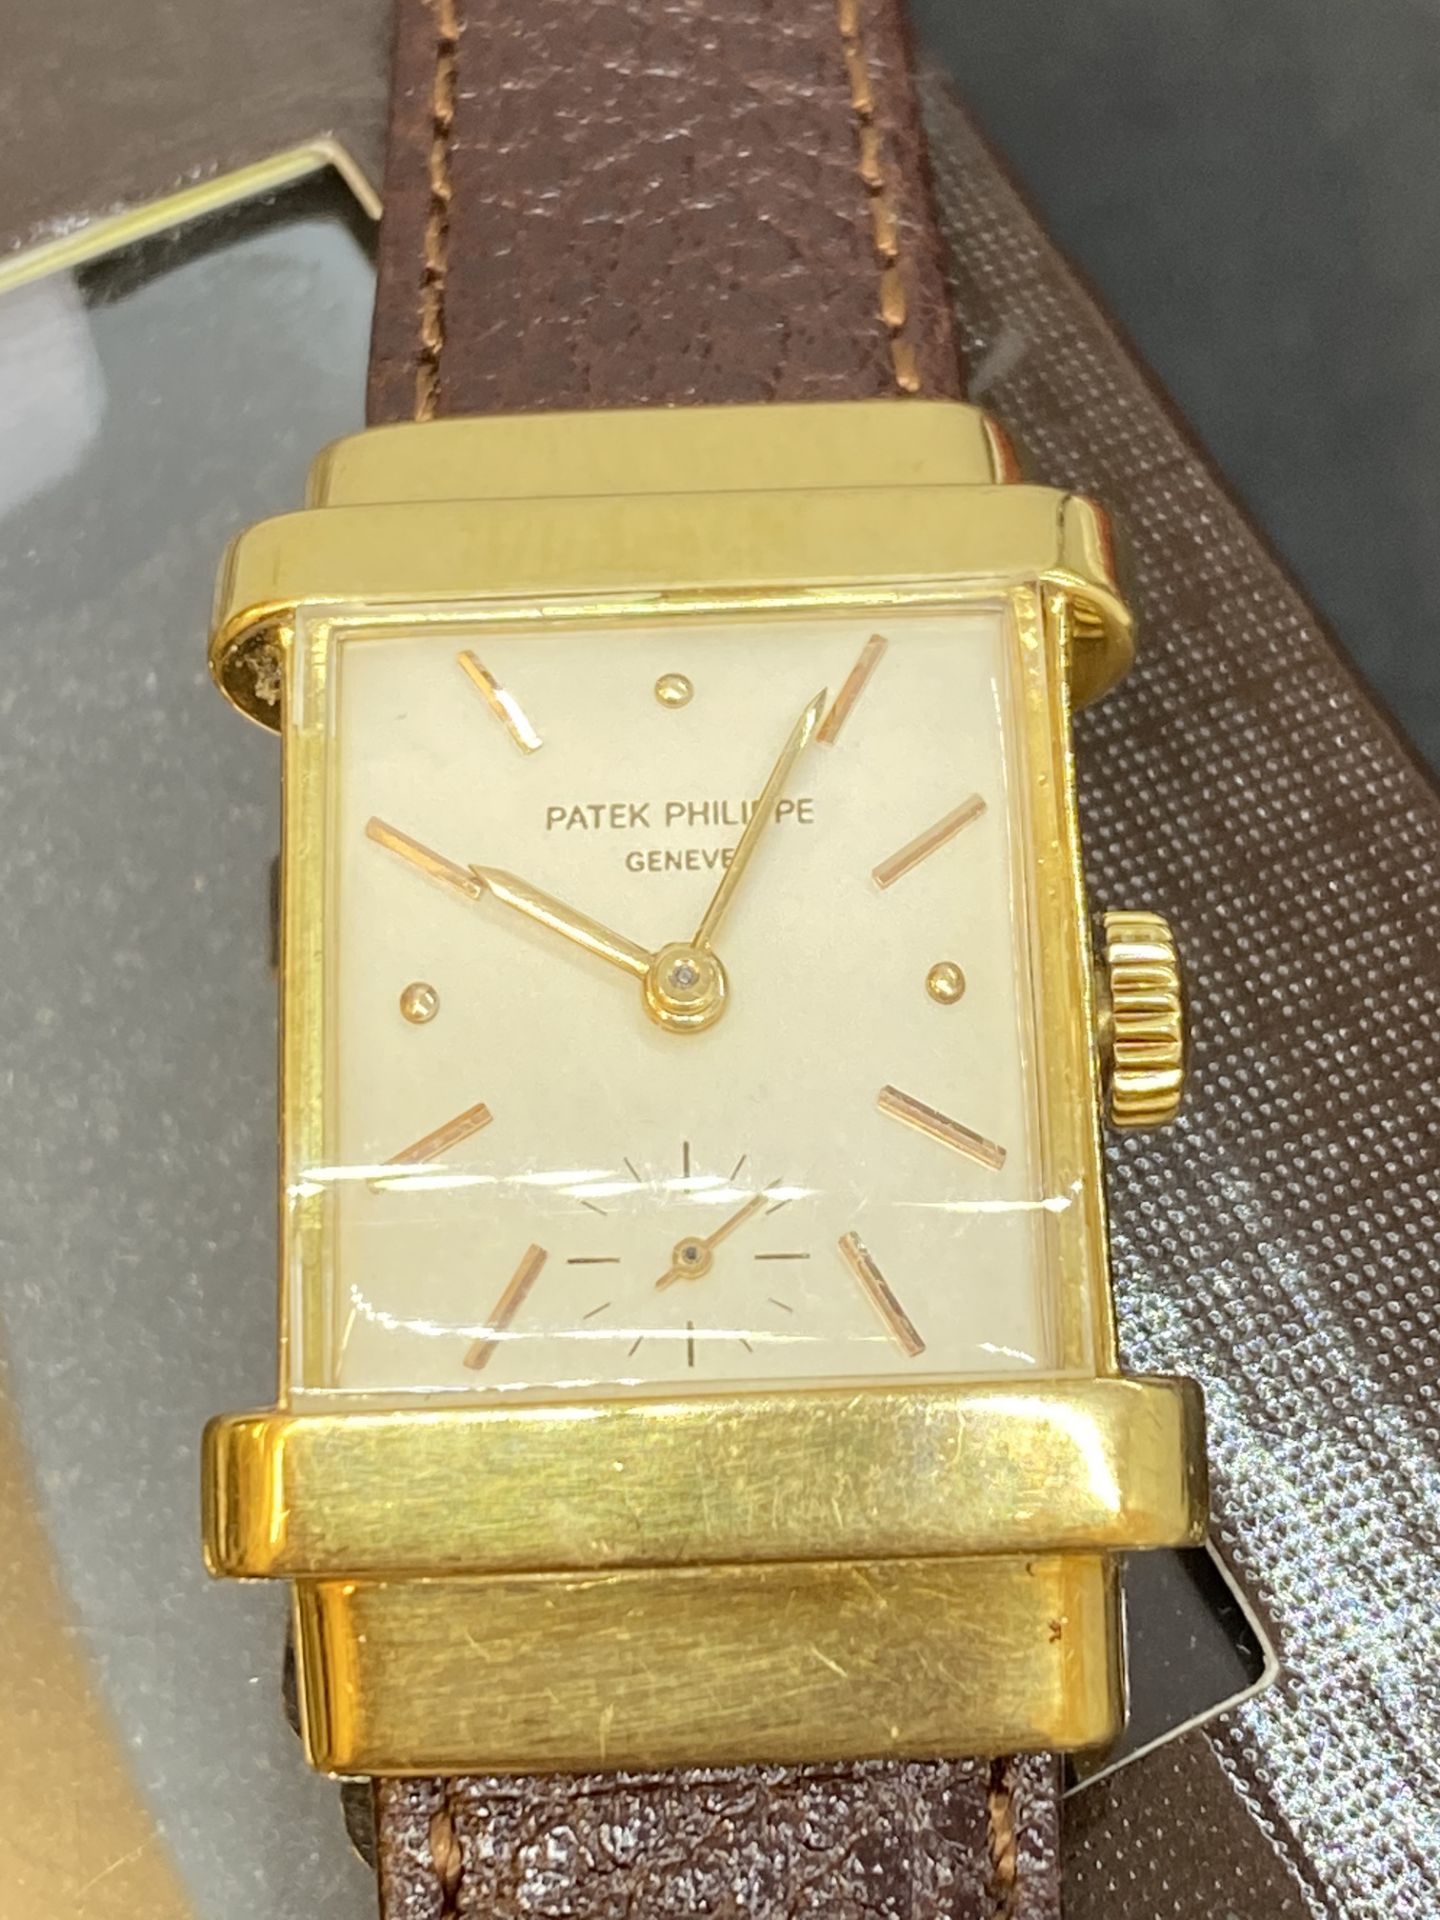 PATEK PHILIPPE 18ct GOLD WATCH WITH PATEK SERVICE BOX - Image 4 of 10